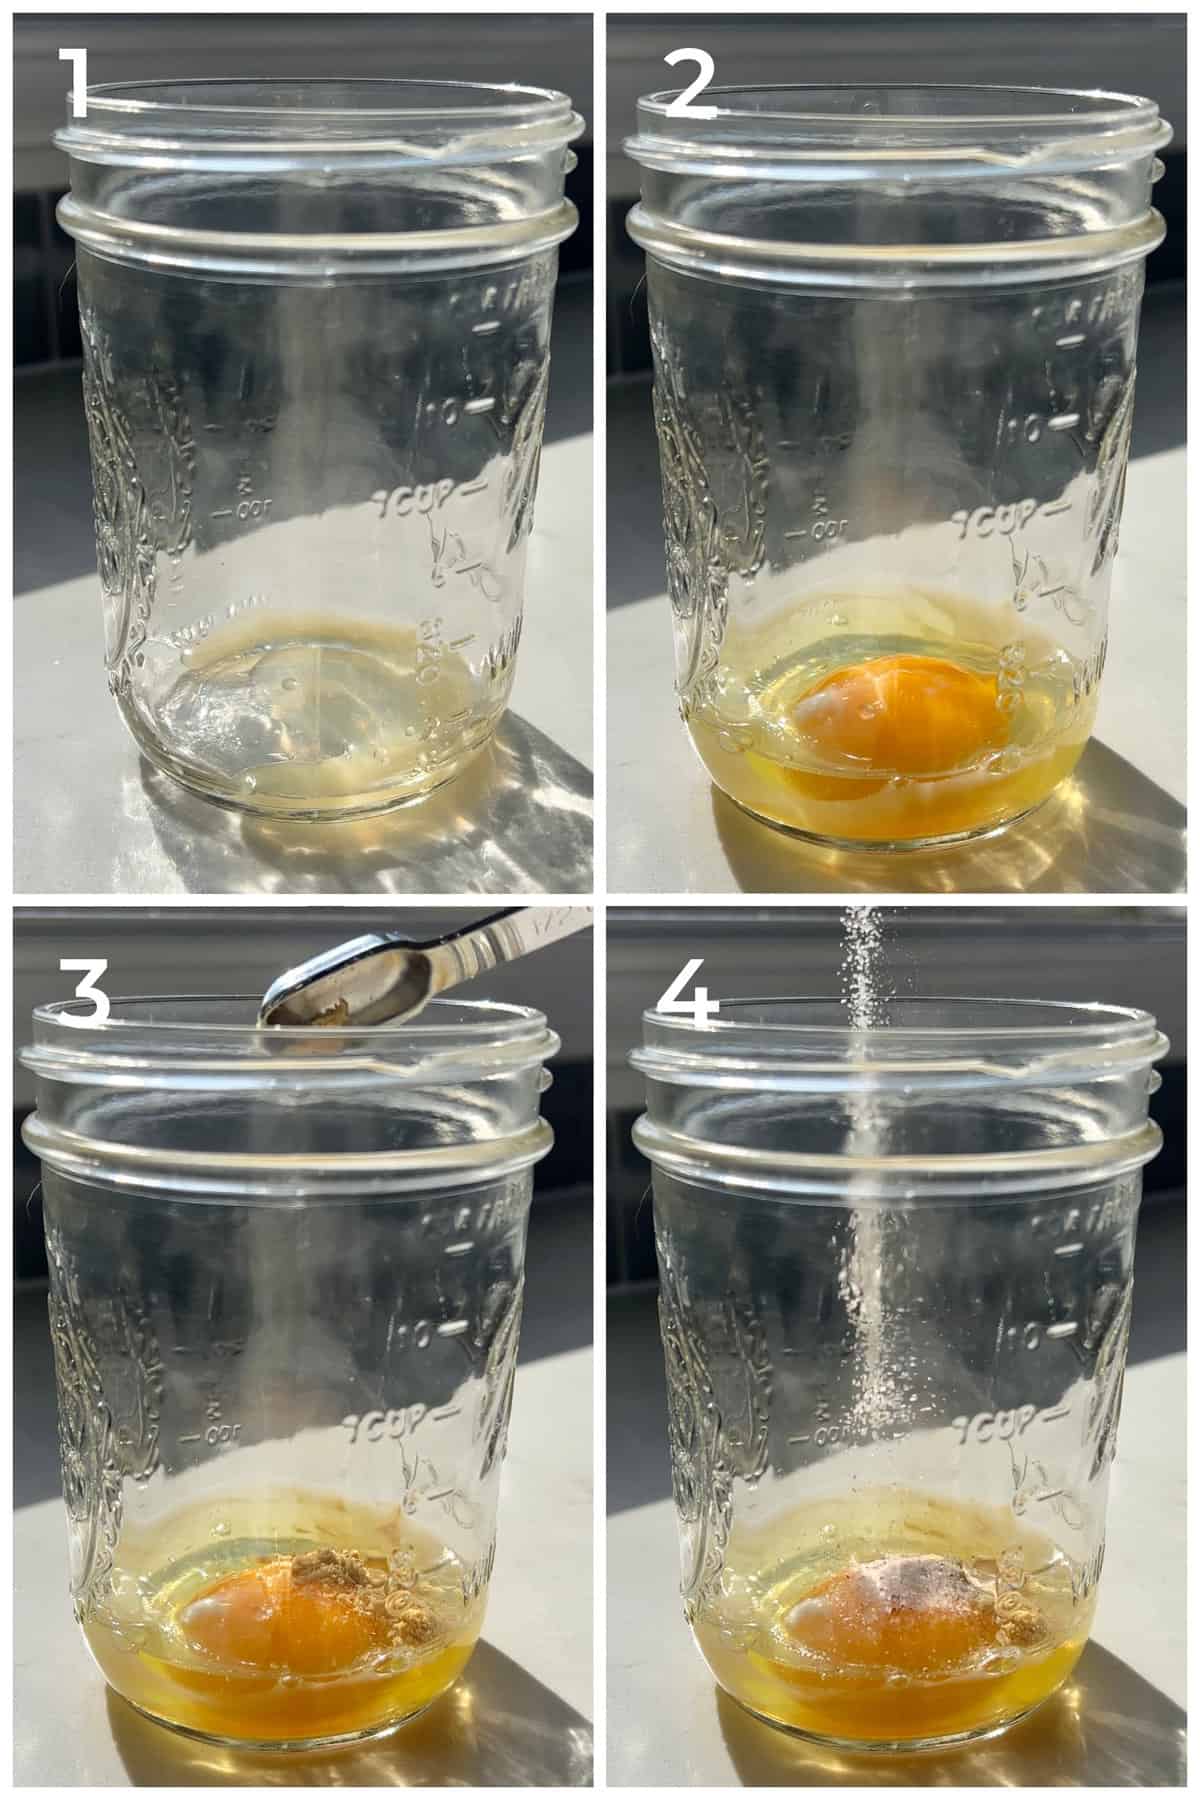 Step by step photos of ingredients being added to a jar to make a homemade mayonnaise.